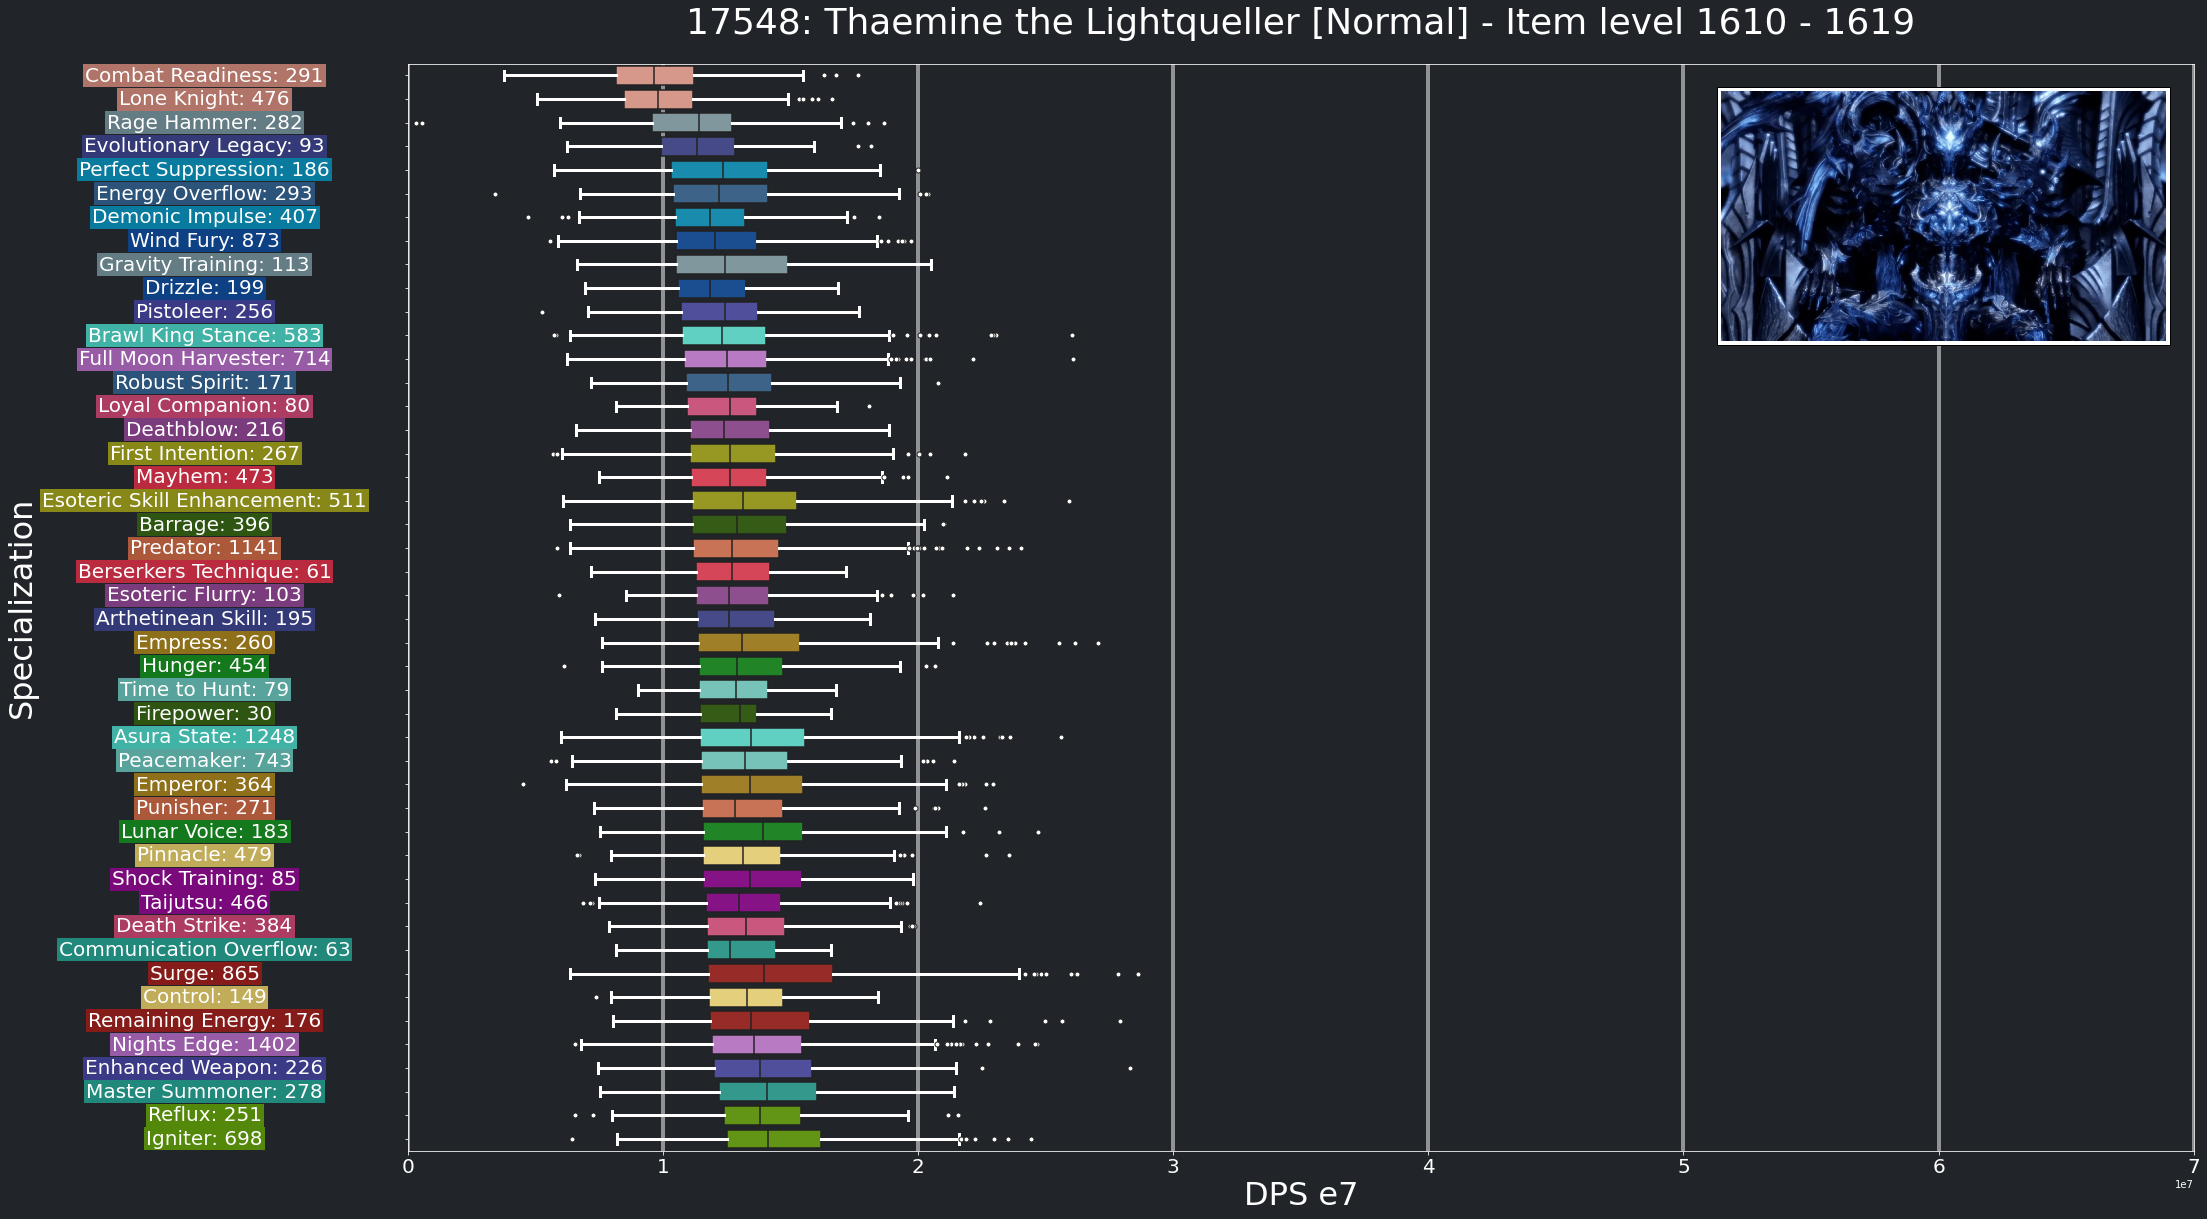 DPS_ThaeminetheLightquellerNormal_1610to1620_Q25.png